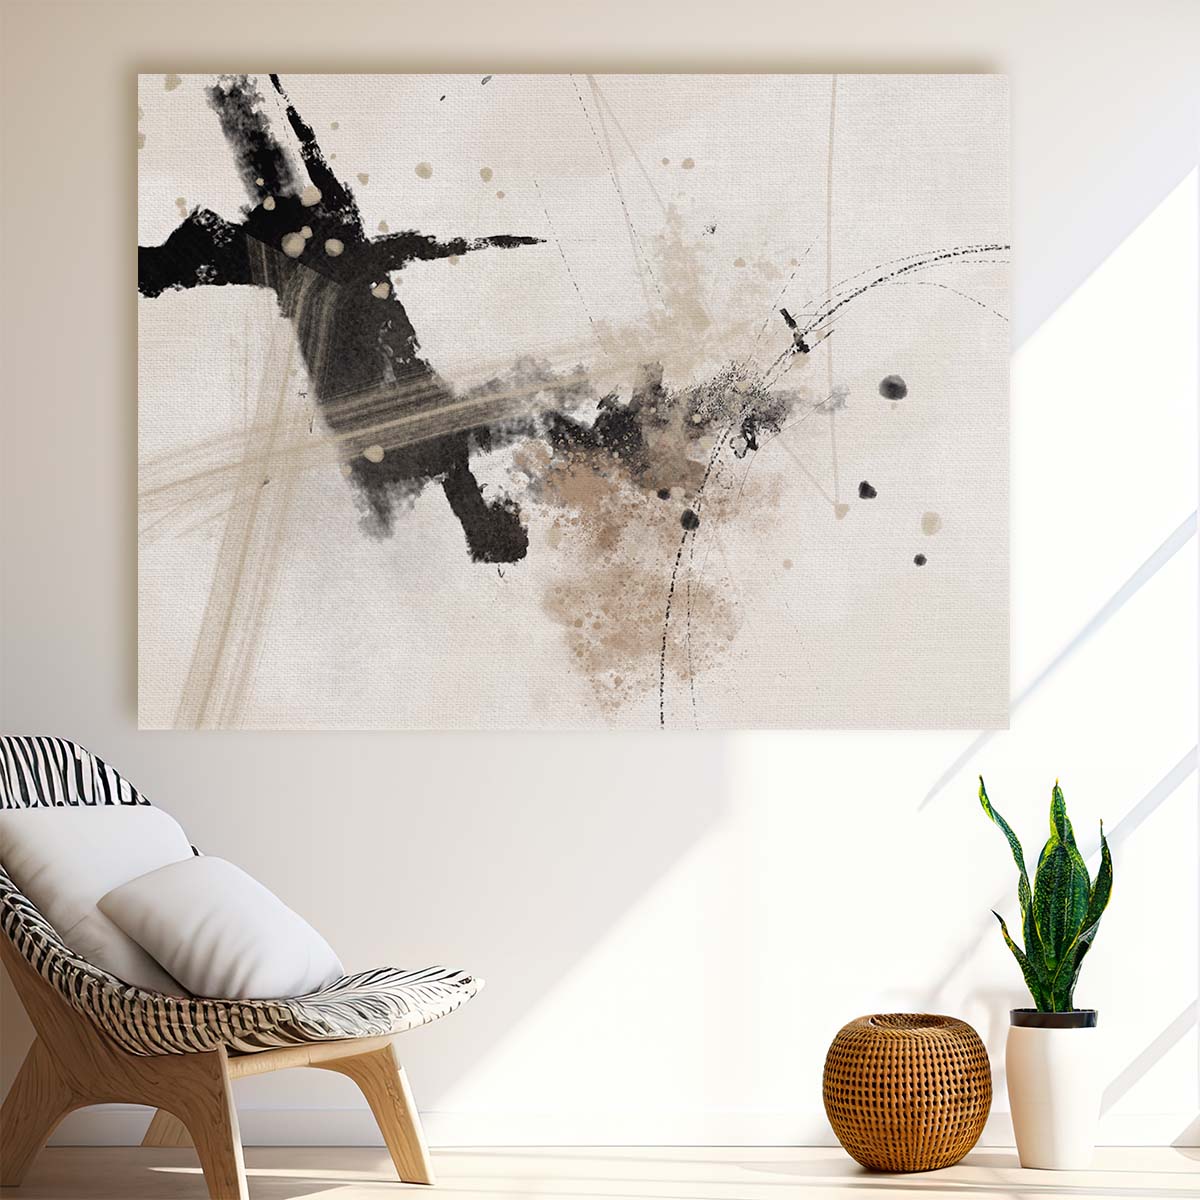 Geometric Abstract Beige & Black Paint Splash Wall Art by Luxuriance Designs. Made in USA.